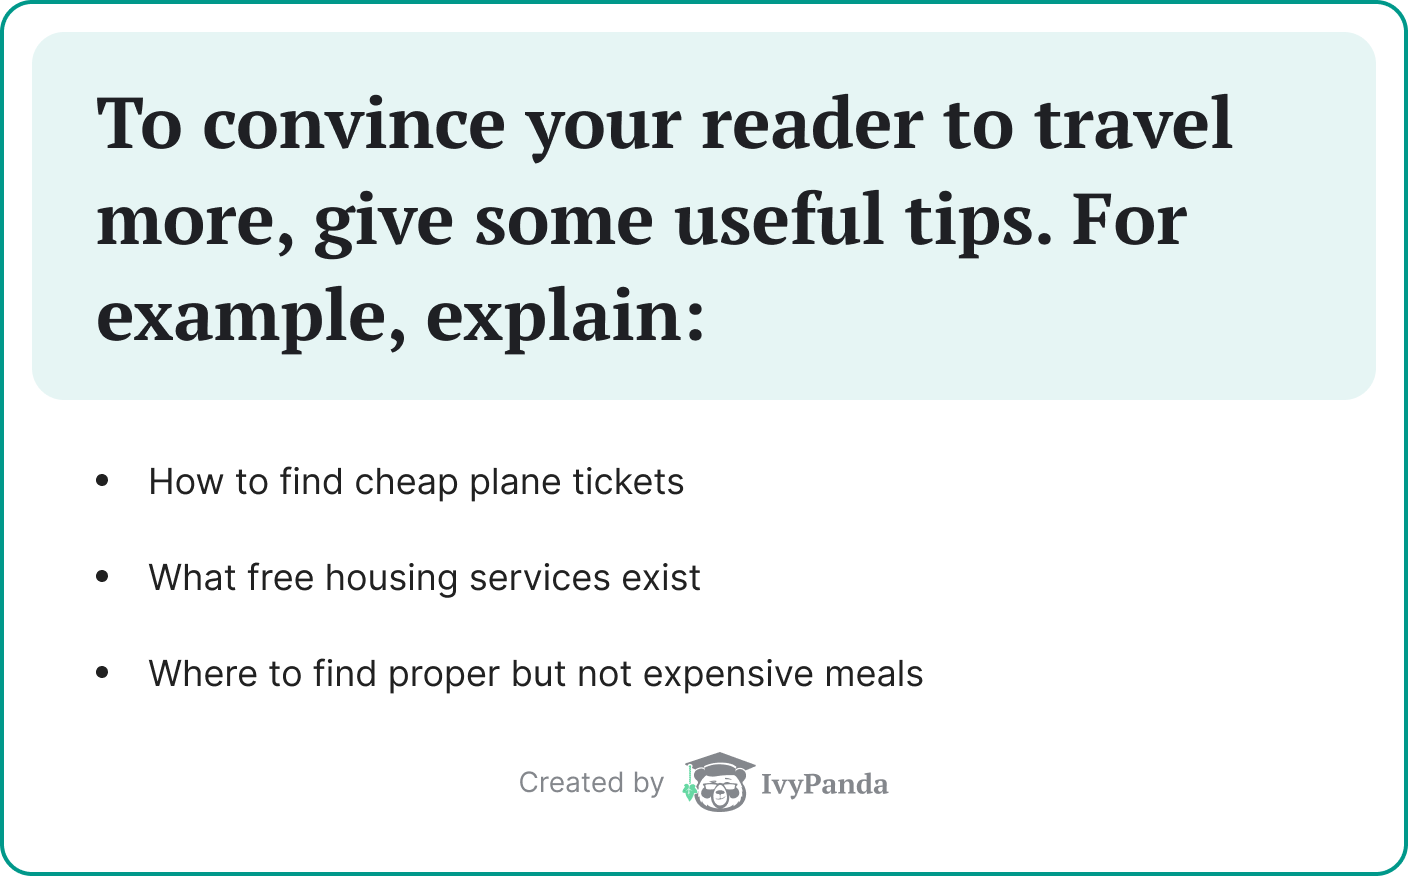 Give some useful tips to persuade your reader to travel more.